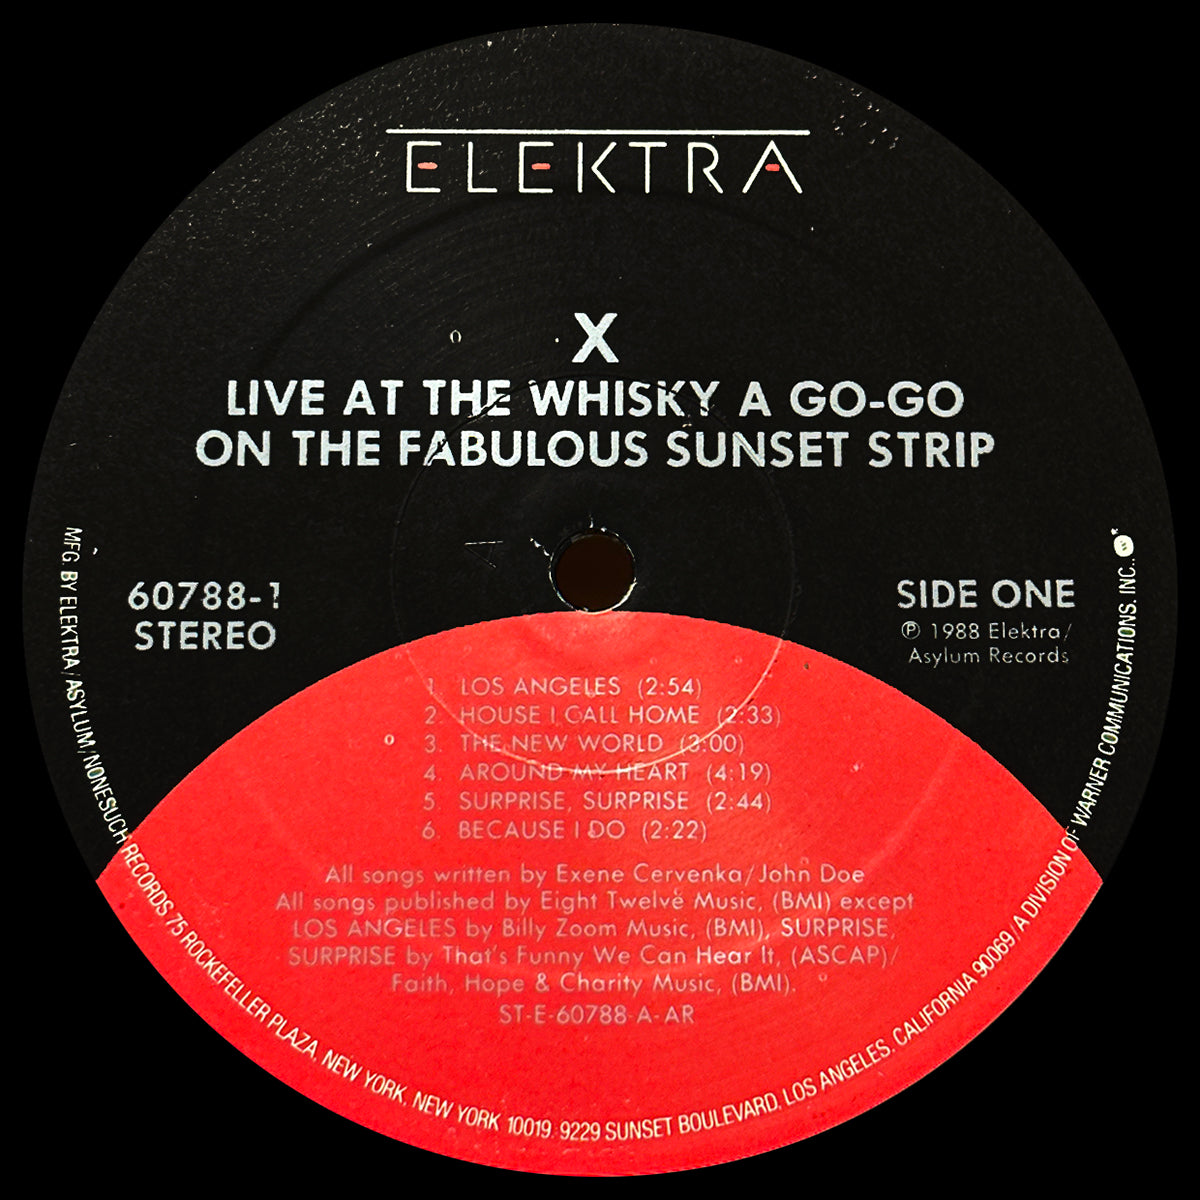 Live At The Whisky A Go-Go On The Fabulous Sunset Strip